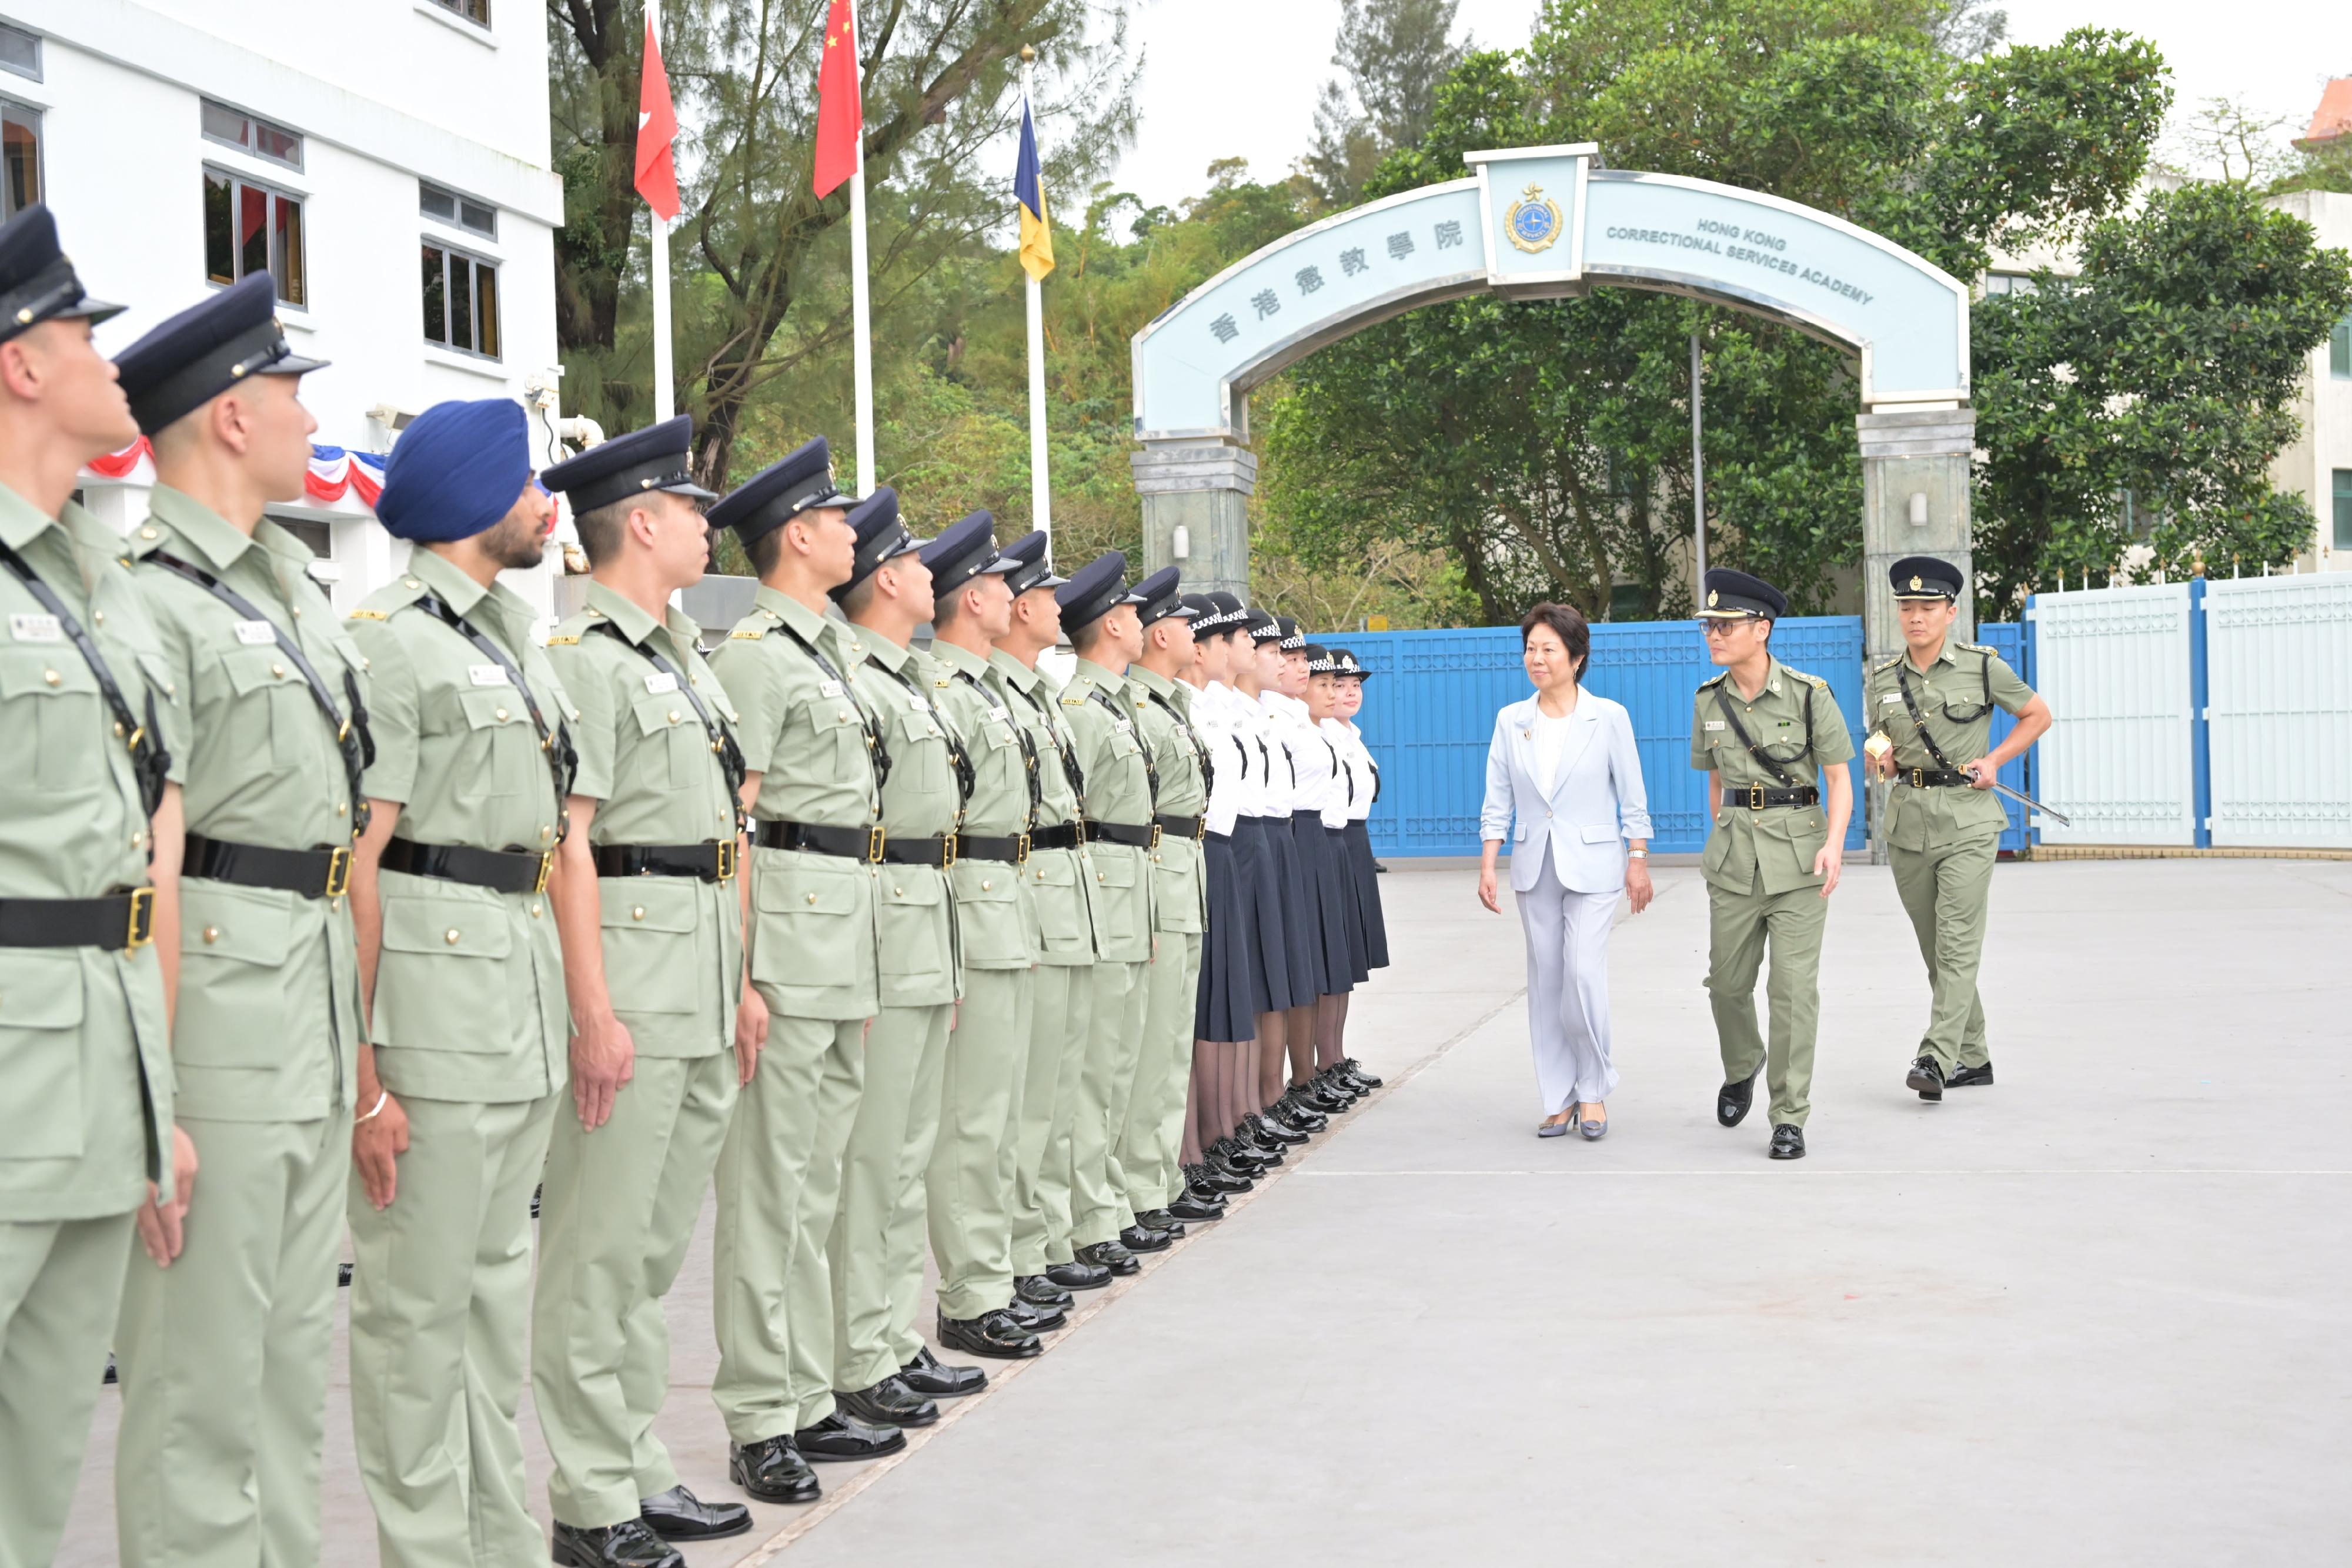 The Correctional Services Department held a passing-out parade at the Hong Kong Correctional Services Academy today (April 21). Photo shows the Chairman of the Committee on Community Support for Rehabilitated Offenders, Ms Tsui Li (third right), inspecting a contingent of graduates.